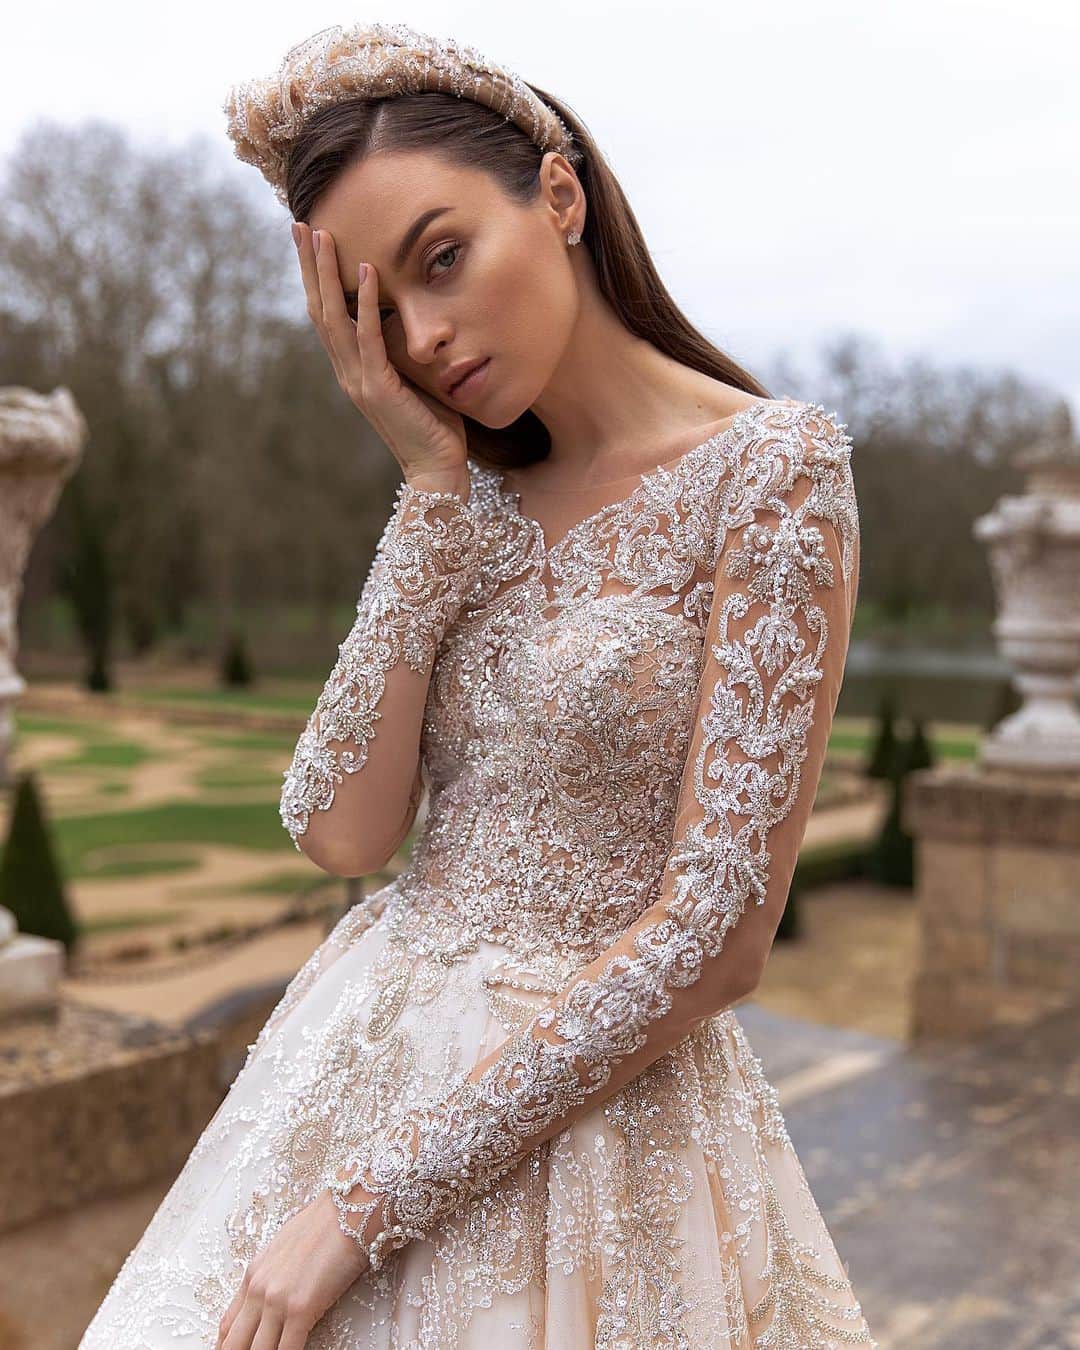 Wedding Lifeのインスタグラム：「@pollardi_fashion_group ⠀ @pollardi_fashion_group Premium designer wedding images. Luxury as a way of life. For the most exquisite brides. Wedding dress #Pollardi - is an exquisite design, flowing plume, an abundance of handmade embroidery, unique lace of own production. ⠀ @pollardi_fashion_group -  is a status, it's a luxury, it's a way of life. It is a reflection of the bride's inner world, the quintessence of her ideas about the perfect wedding. The luxury and brilliance, the light of the soffits, the bright fireworks on the background of the night sky - this is the wedding which deserves every bride who has chosen our dress.  #PollardiFashionGroup #newcollection #weddinggown #instawedding #weddingday #wedding #weddingdress #bridal #bride #fashion #style #newyork #london #dubai #paris #istanbul #moscow #sydney #nyc #gowndress #eveningdress #miami #hautecouture #moda #ウェディングドレス #花嫁 #ウェディングフォト v #おしゃれ花嫁  #2021夏婚」